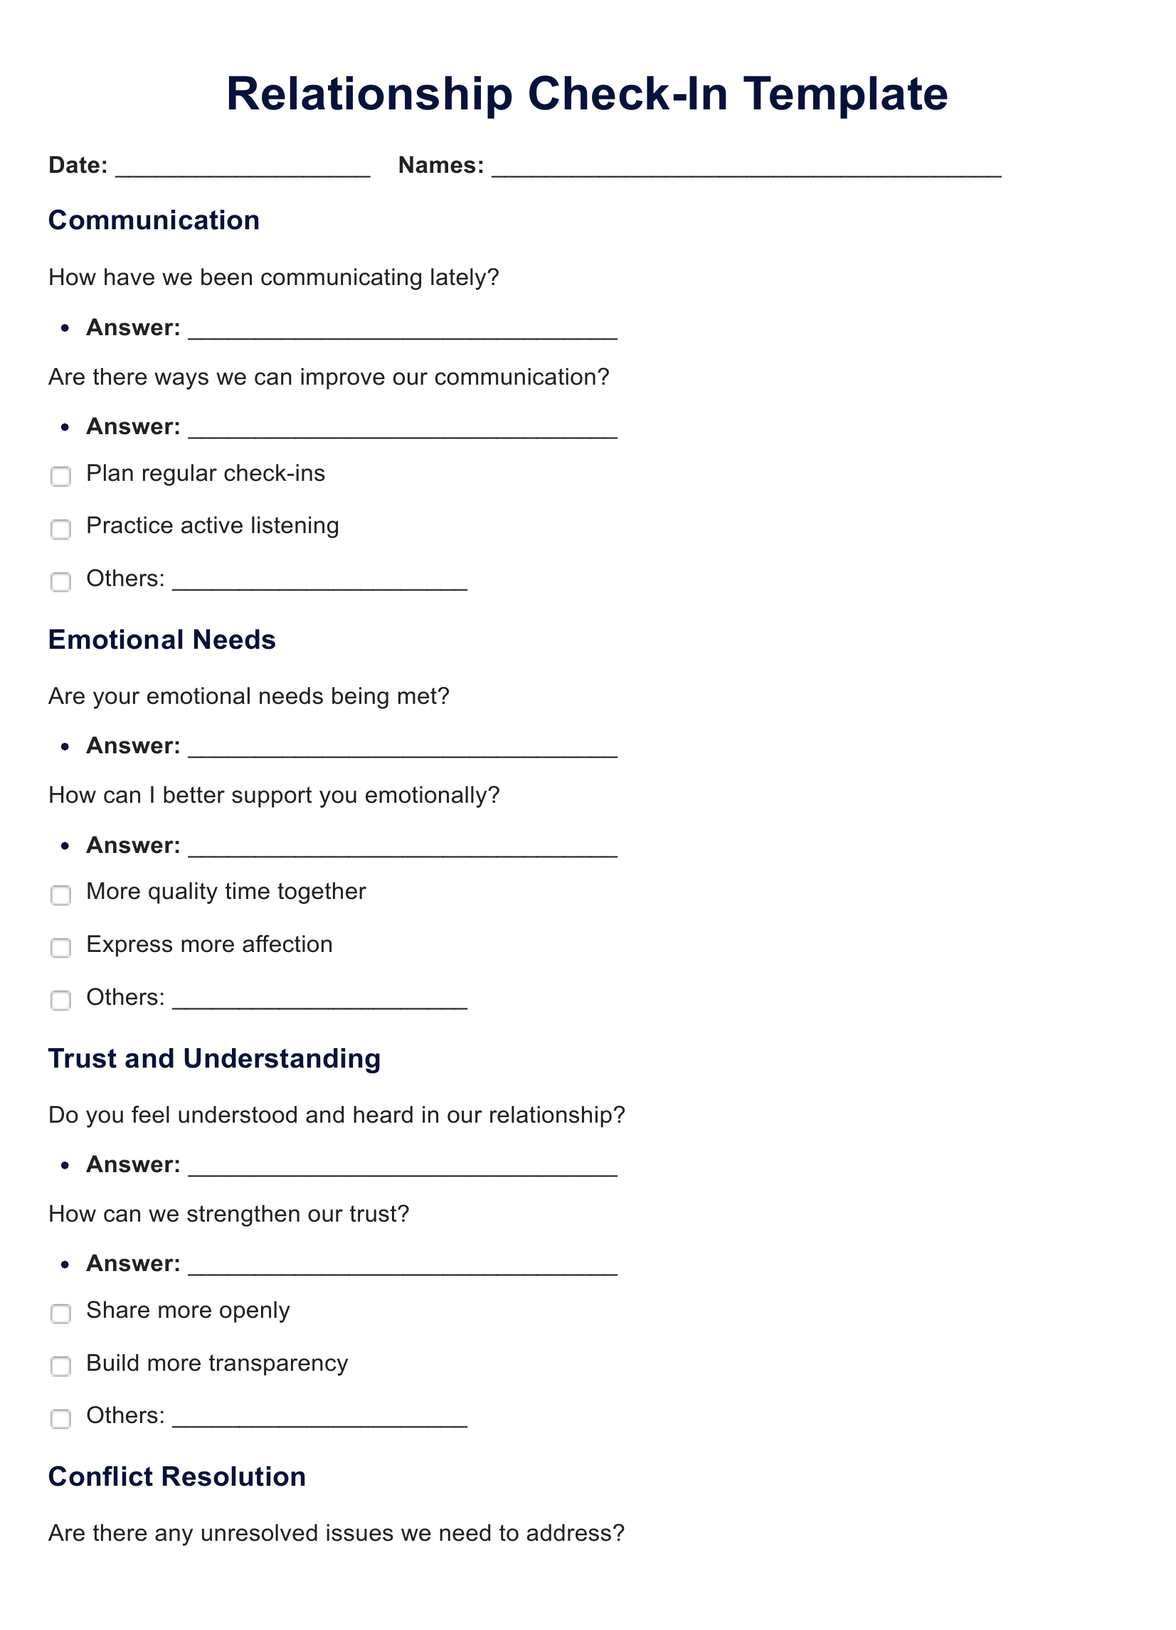 Relationship Check-In Template PDF Example